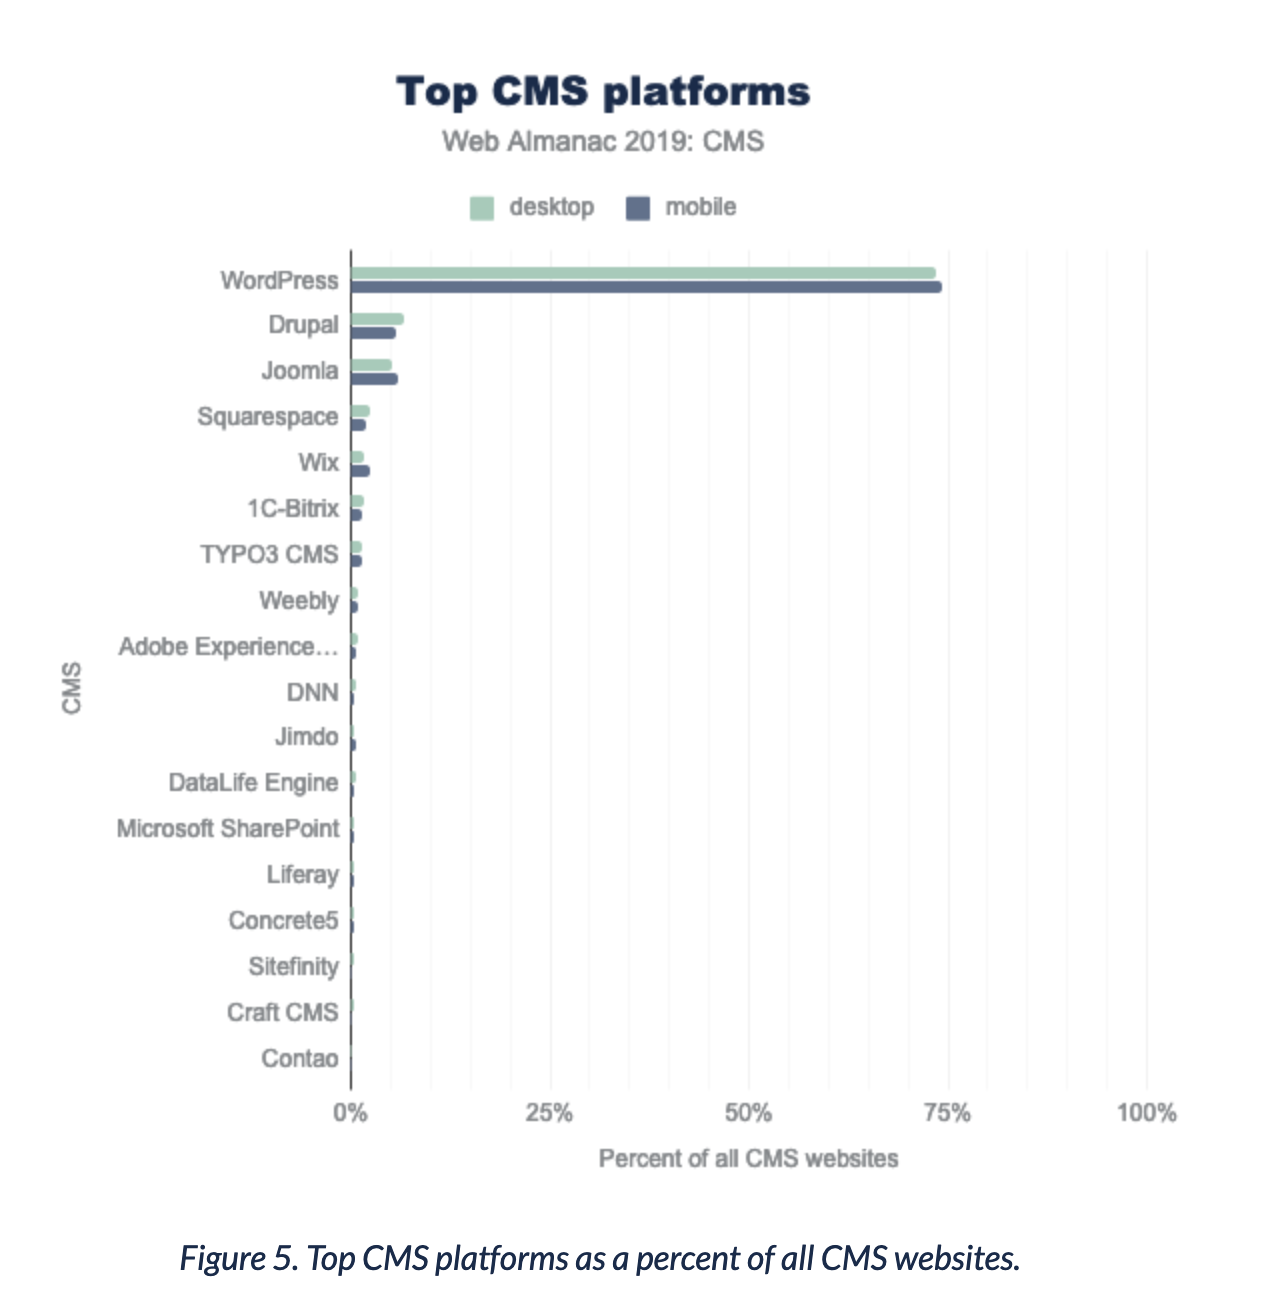 Graphic showing CMS distribution: Wordpress is on top with 75% followed by Drupal and Joomla (both below 10%)